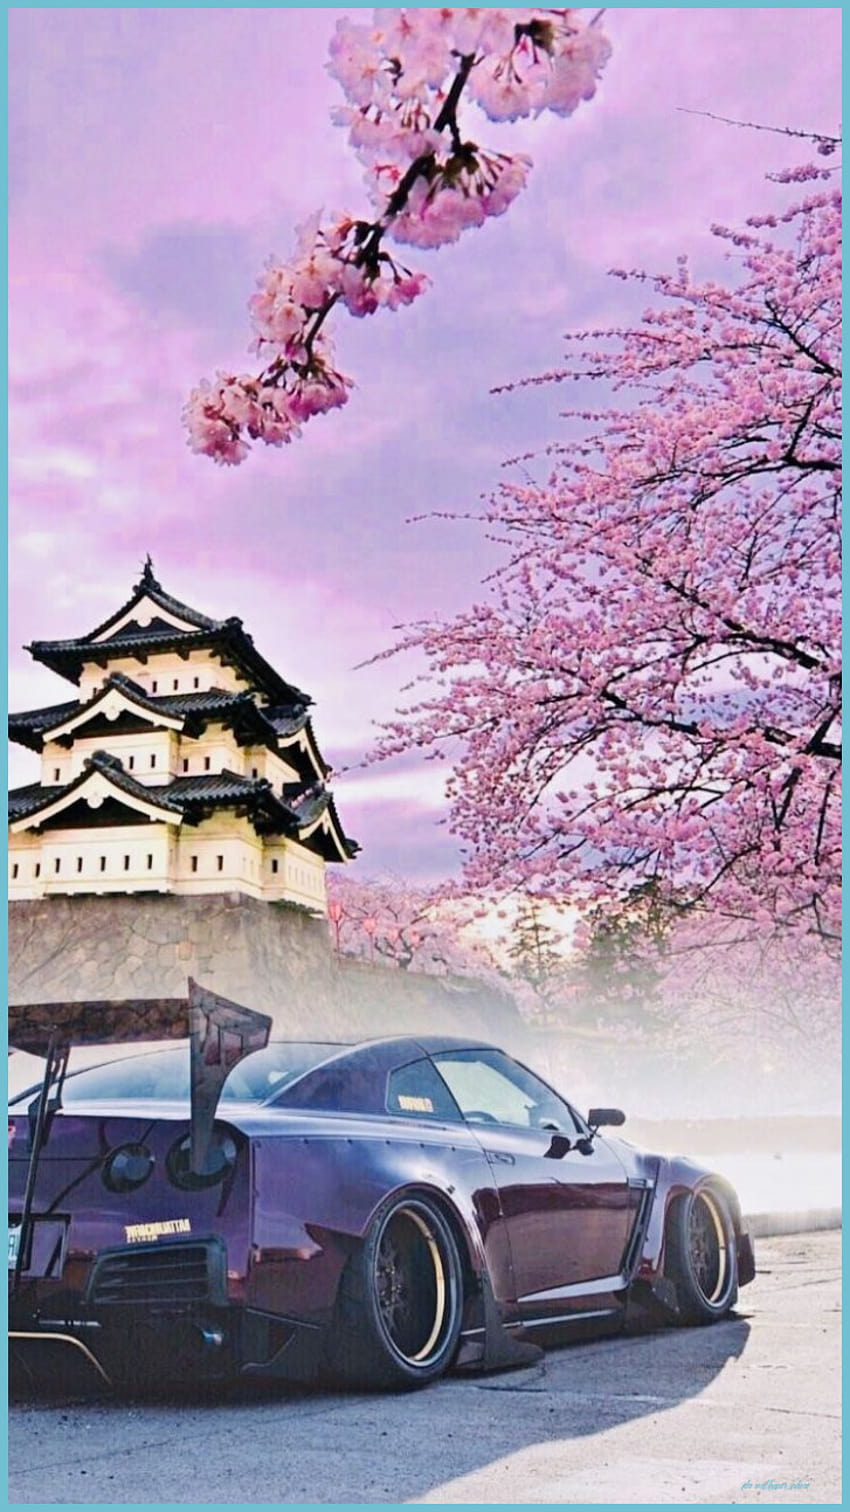 A purple car is parked in front of an old castle - JDM